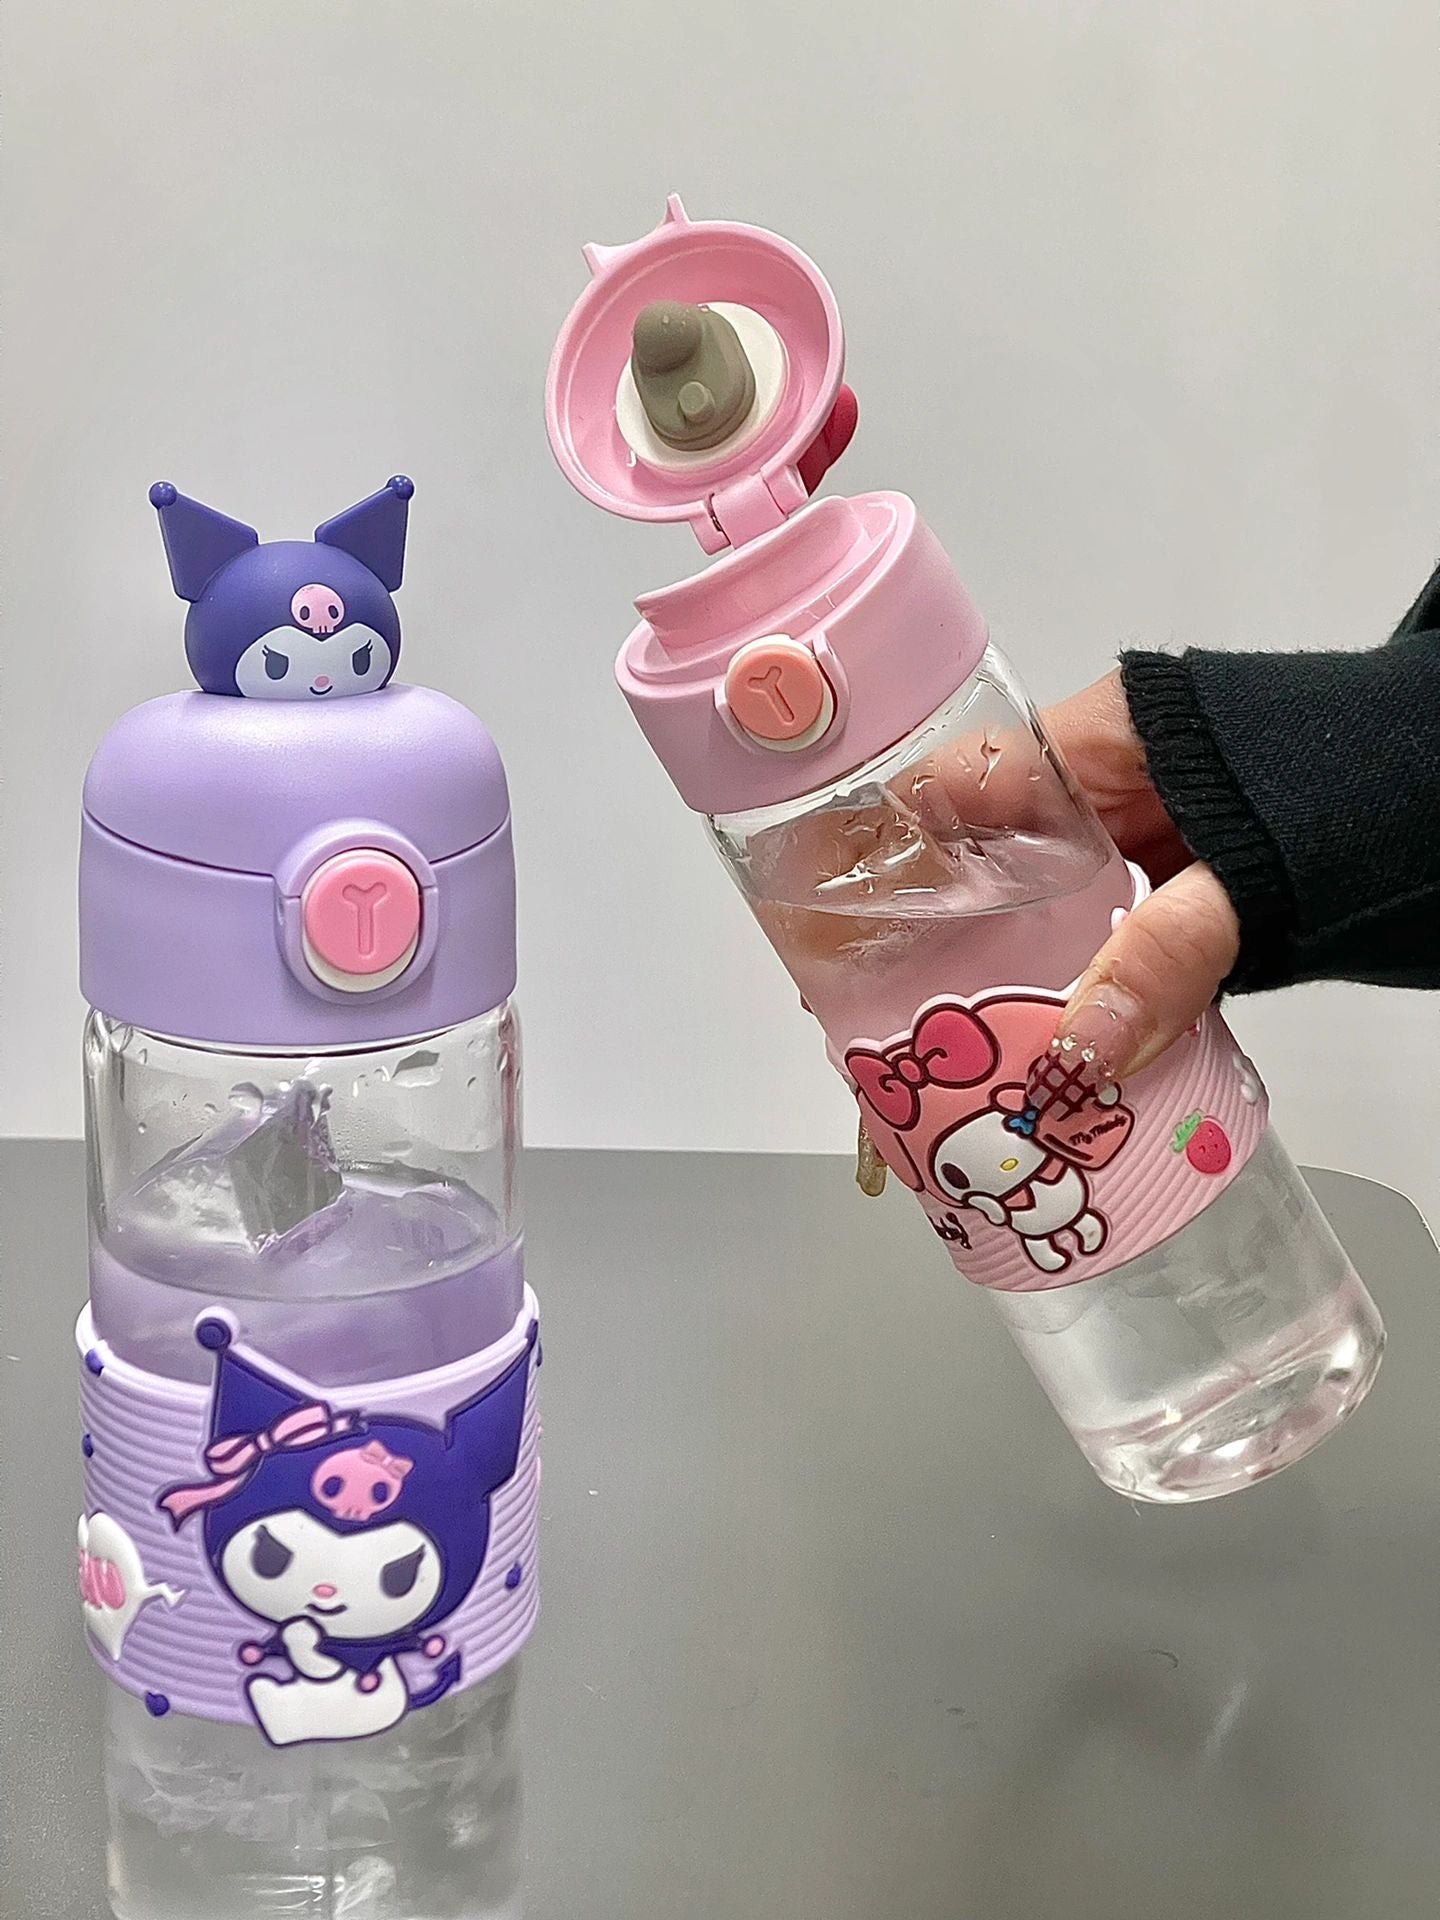 Sanrio Leakproof Portable Glass Cups | One Button Open Water Bottle (330ml)